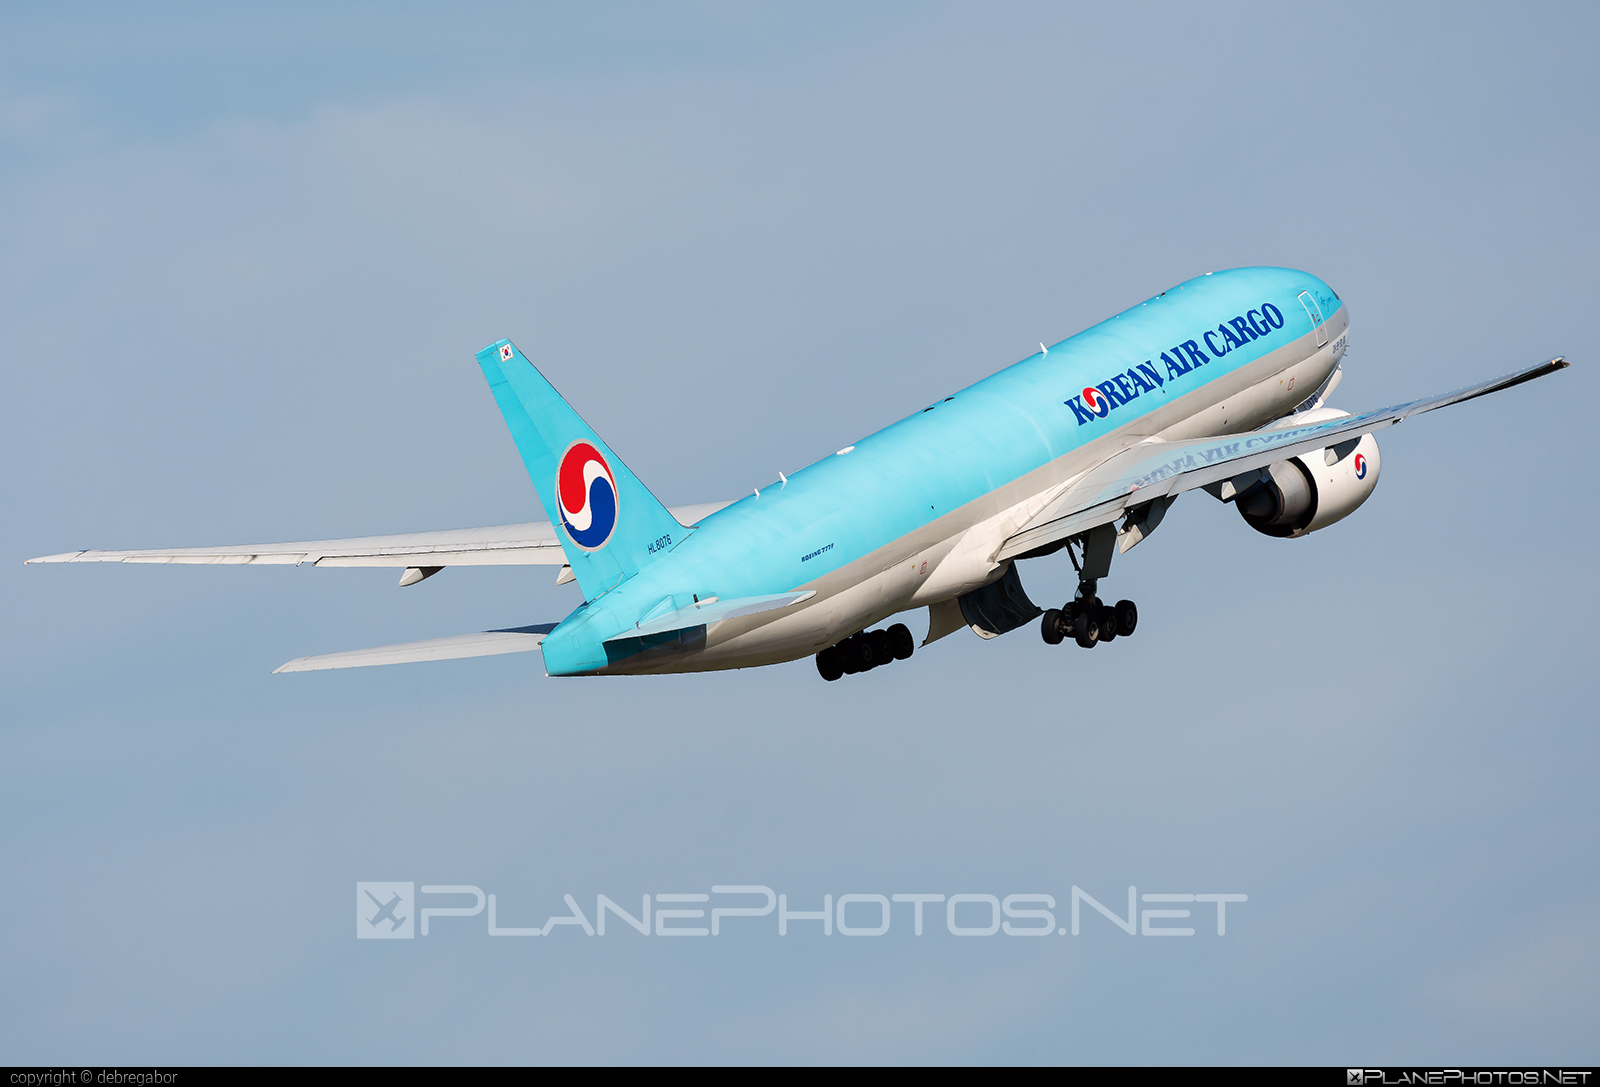 Boeing 777F - HL8076 operated by Korean Air Cargo #b777 #b777f #b777freighter #boeing #boeing777 #koreanair #koreanaircargo #tripleseven